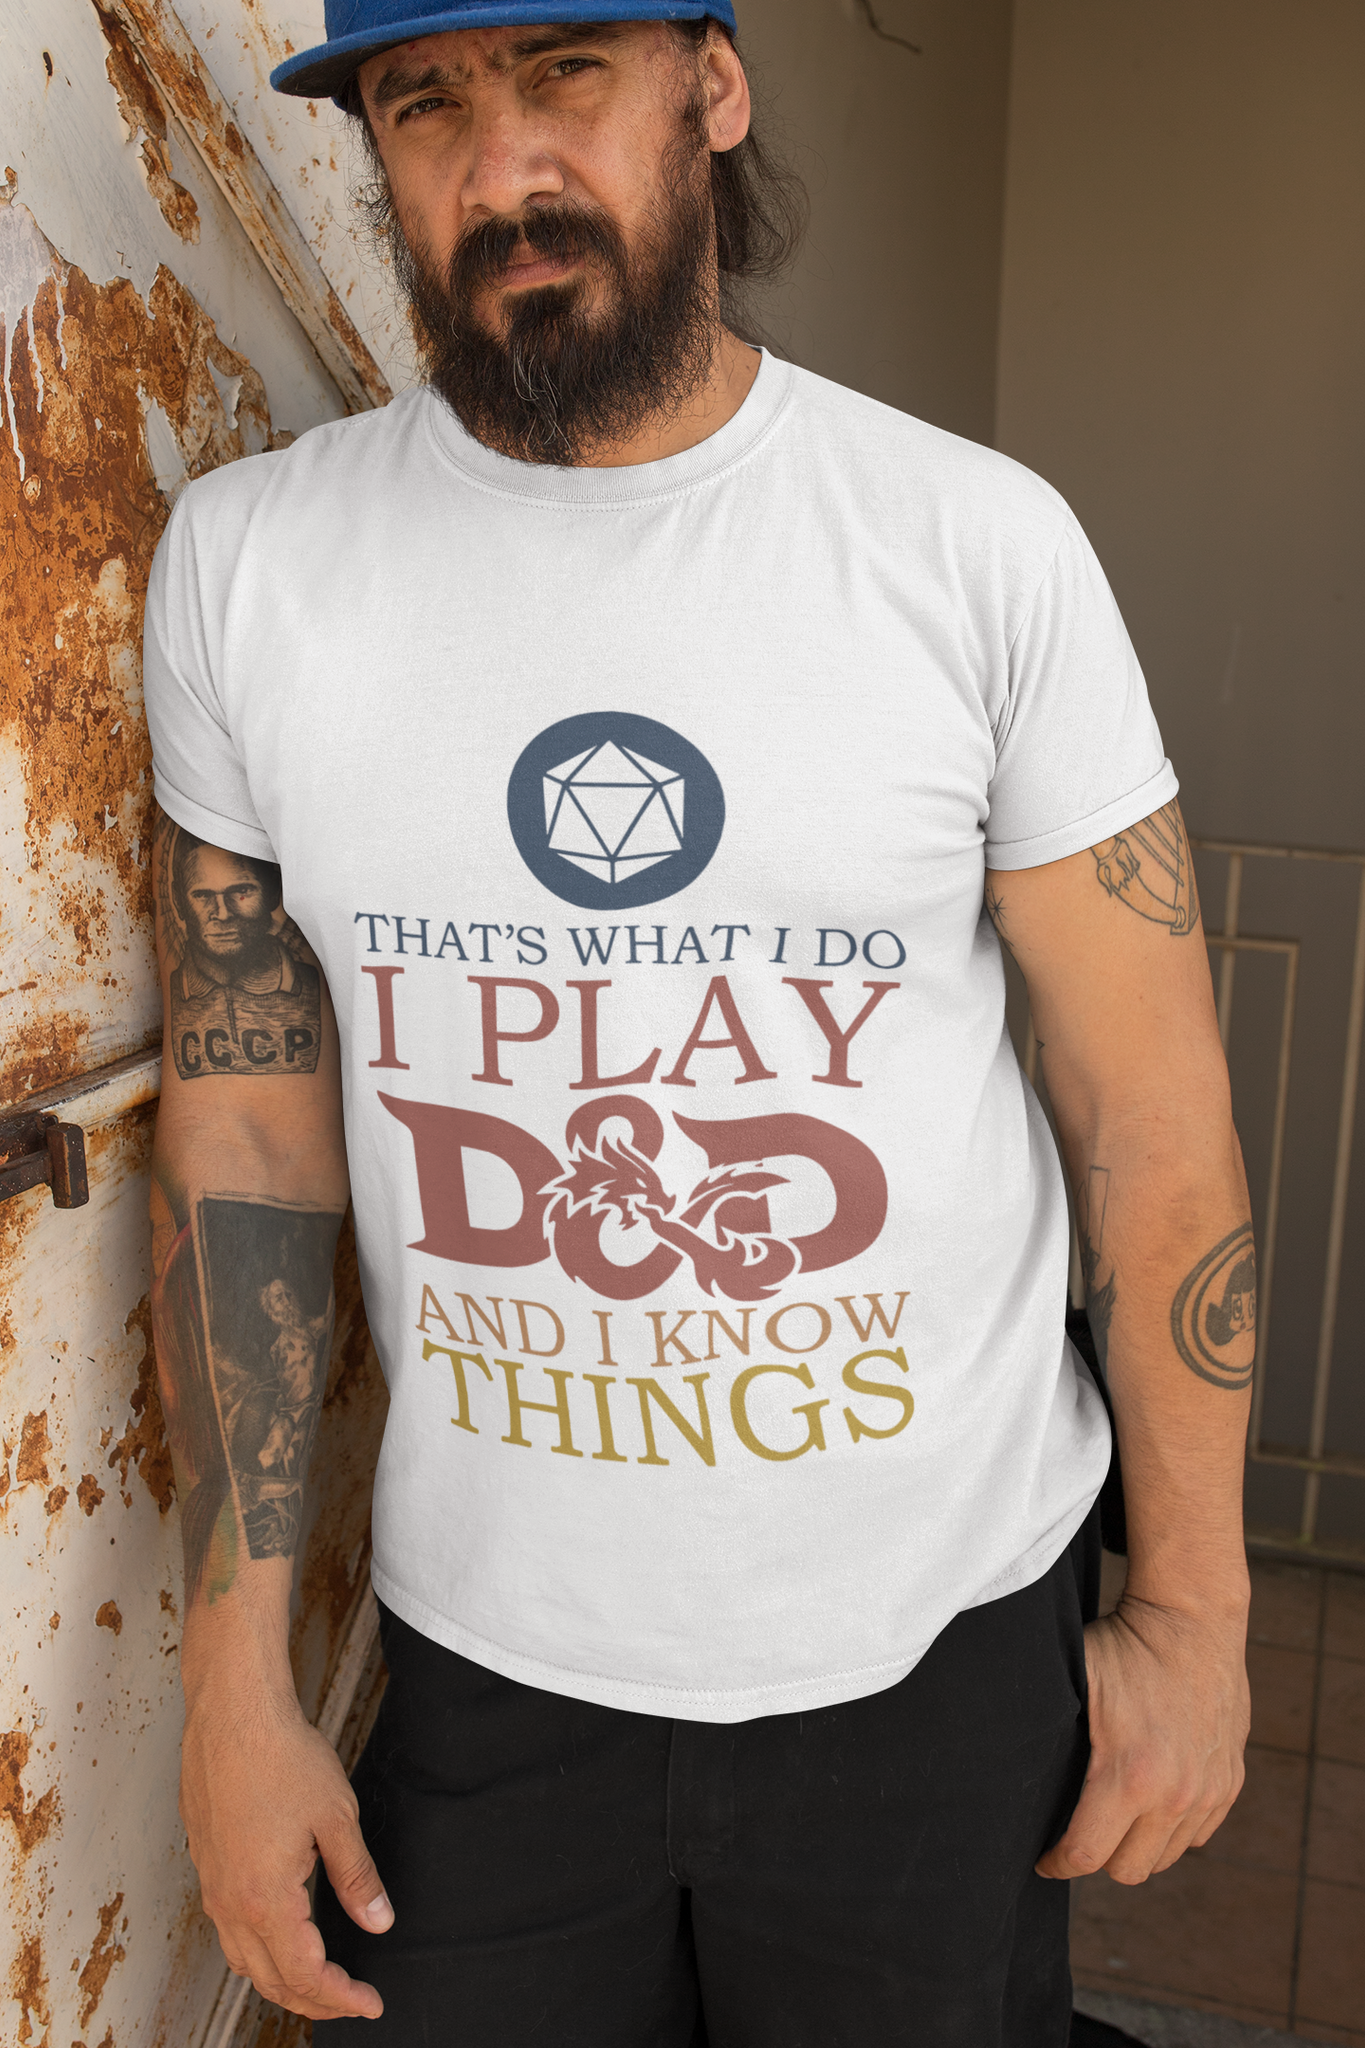 Dungeon And Dragon T Shirt, Thats What I Do I Play DND And I Know Things T Shirt, RPG Dice Games Tshirt